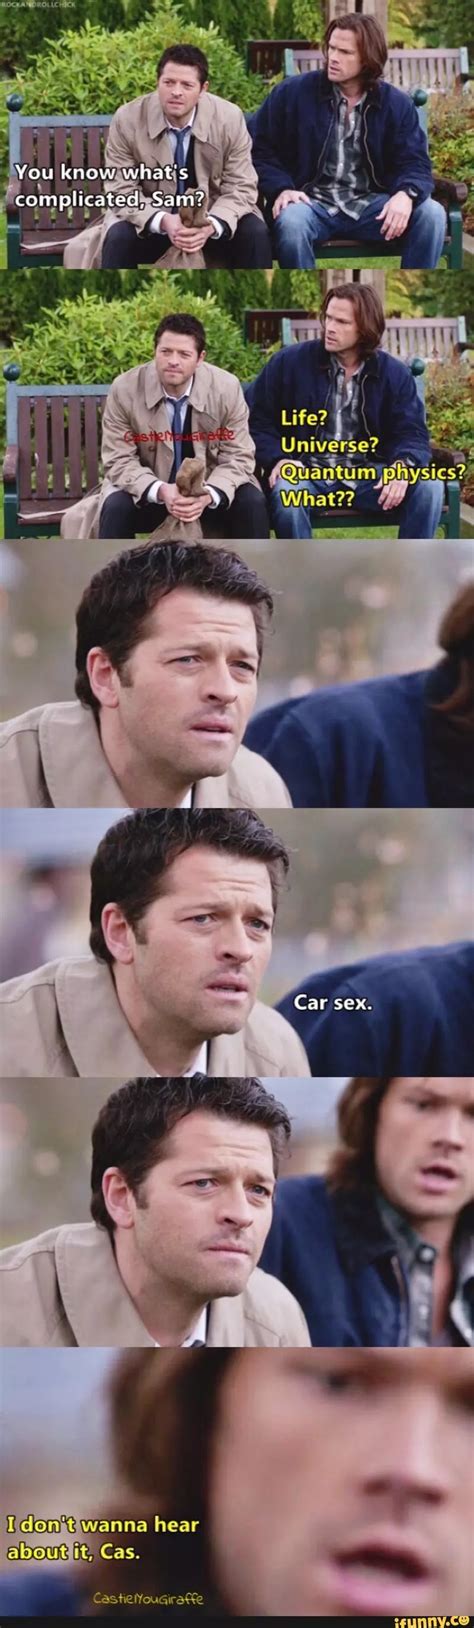 Pin By Donna Noble On Destiel Supernatural Fangirl Supernatural Comic Supernatural Funny